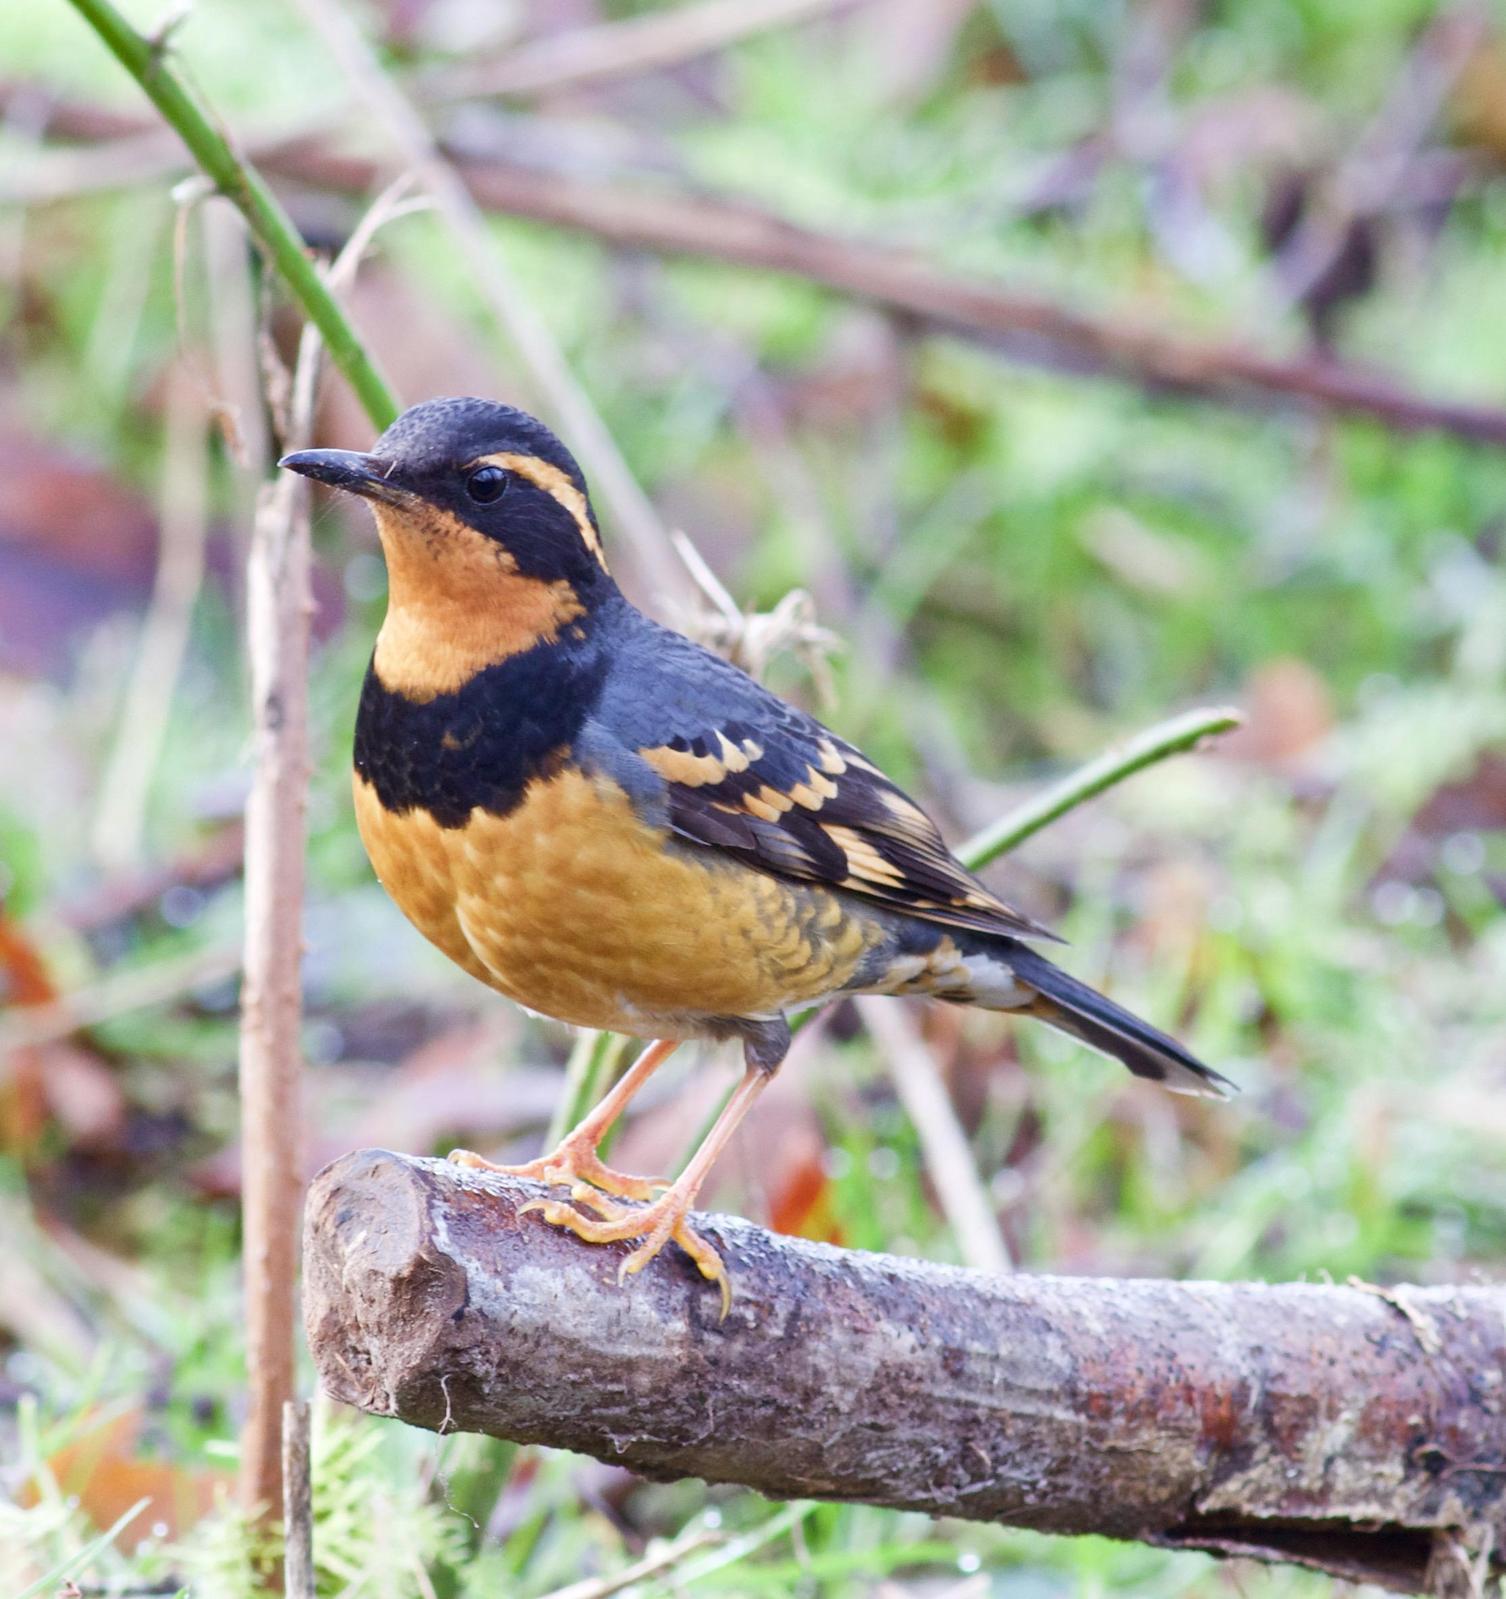 Varied Thrush Photo by Kathryn Keith